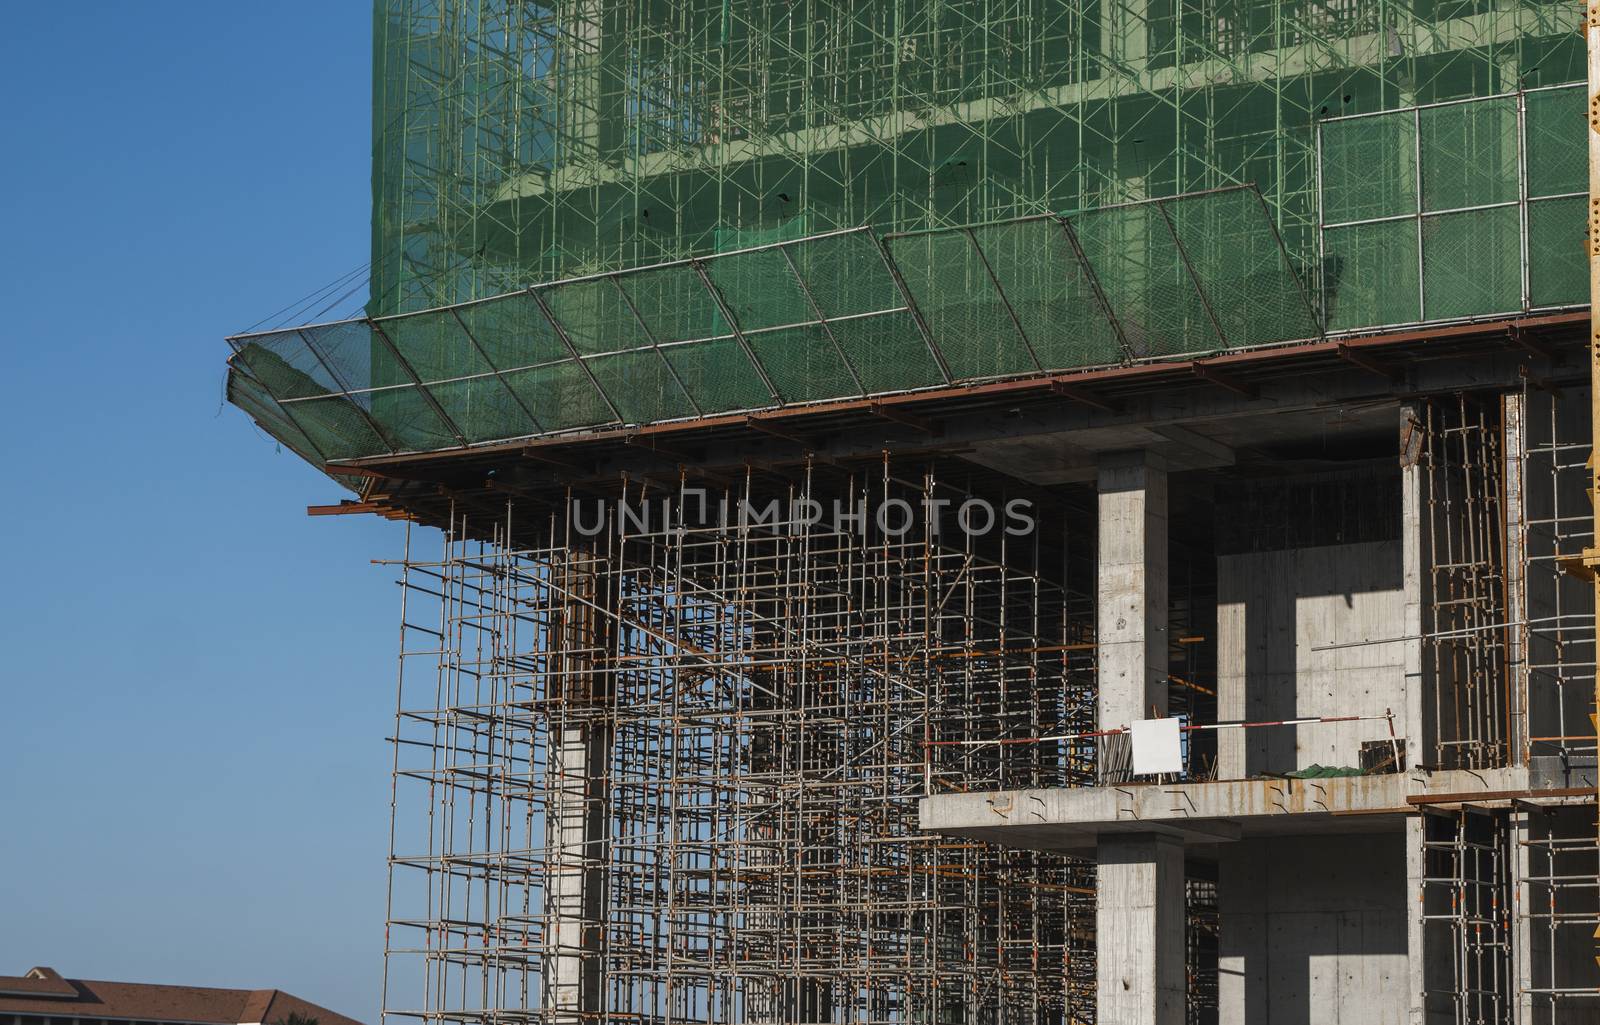 Building and Construction Site in progress. Building construction site against blue sky. Metal construction of unfinished building on construction of multi storage building